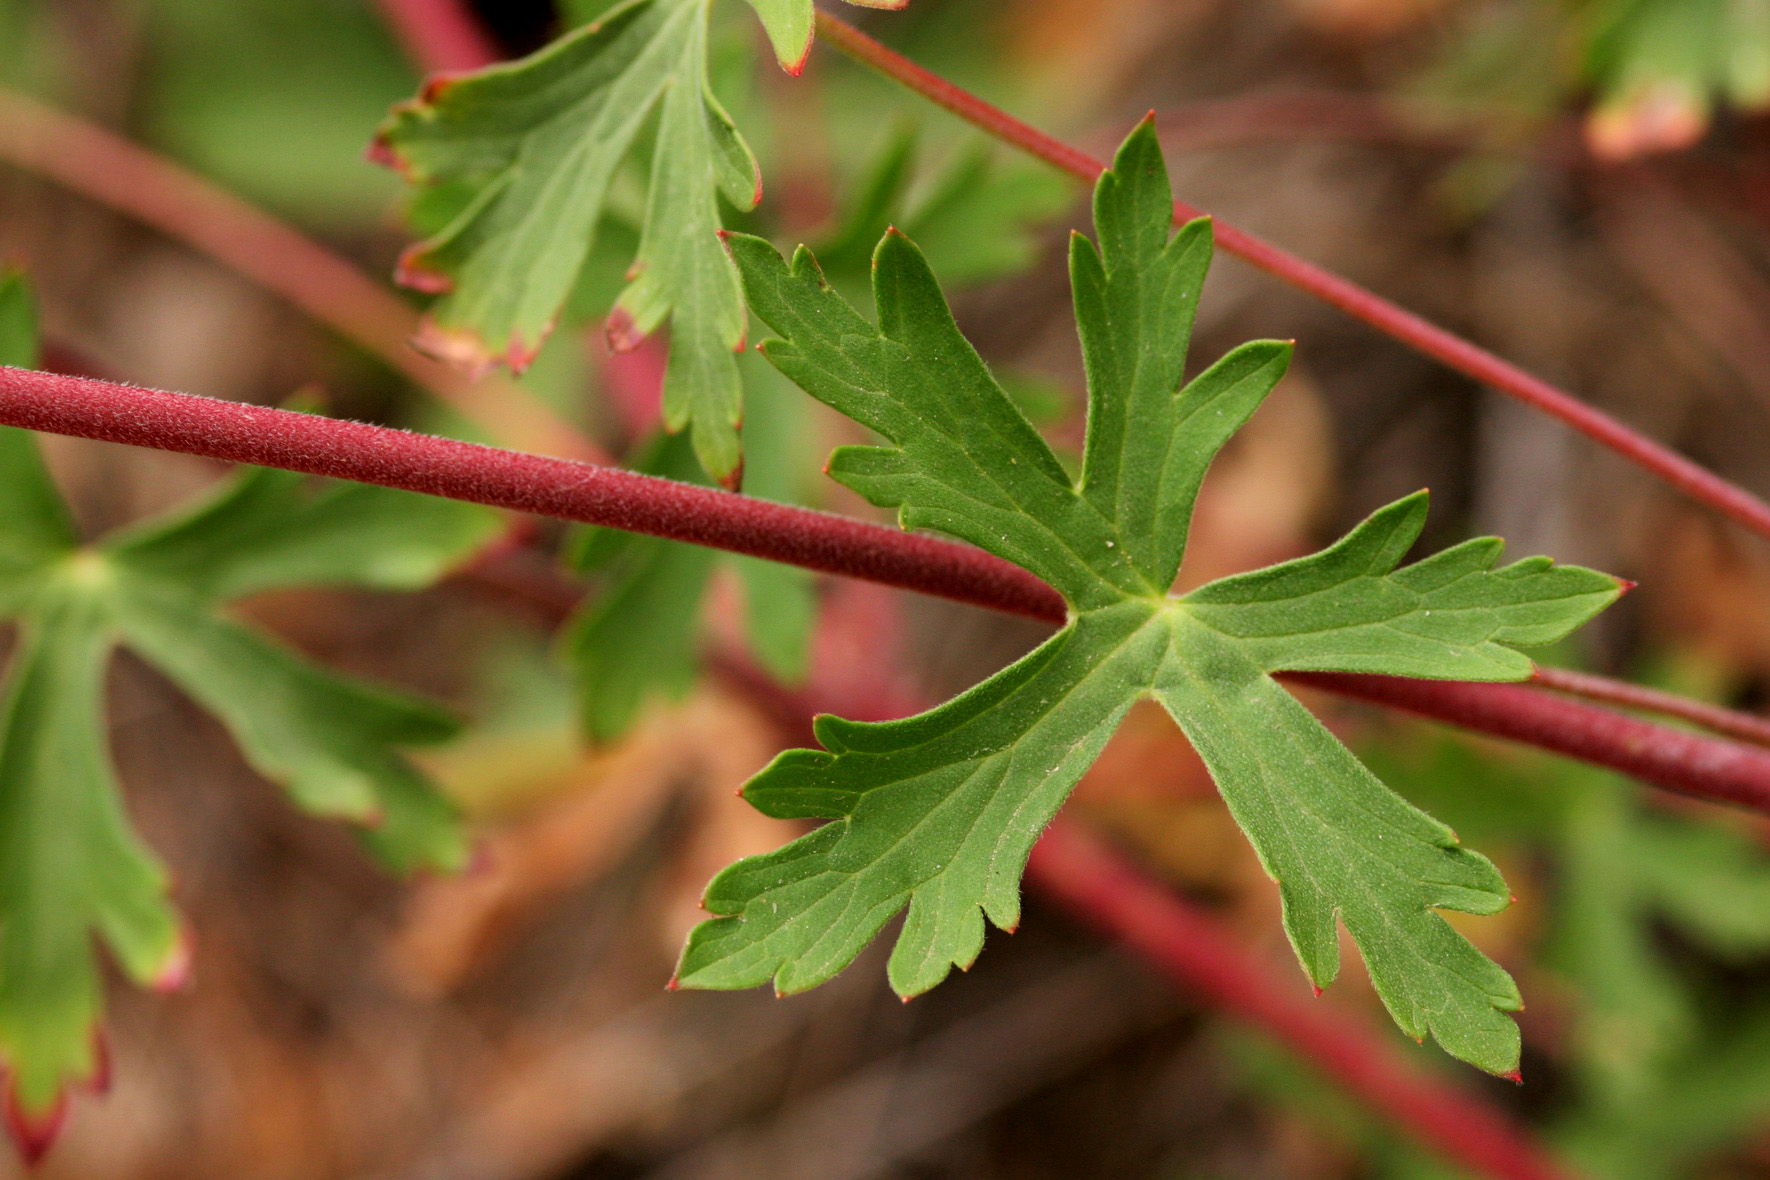 Palmately cleft leaves and red stems of Geranium caespitosum